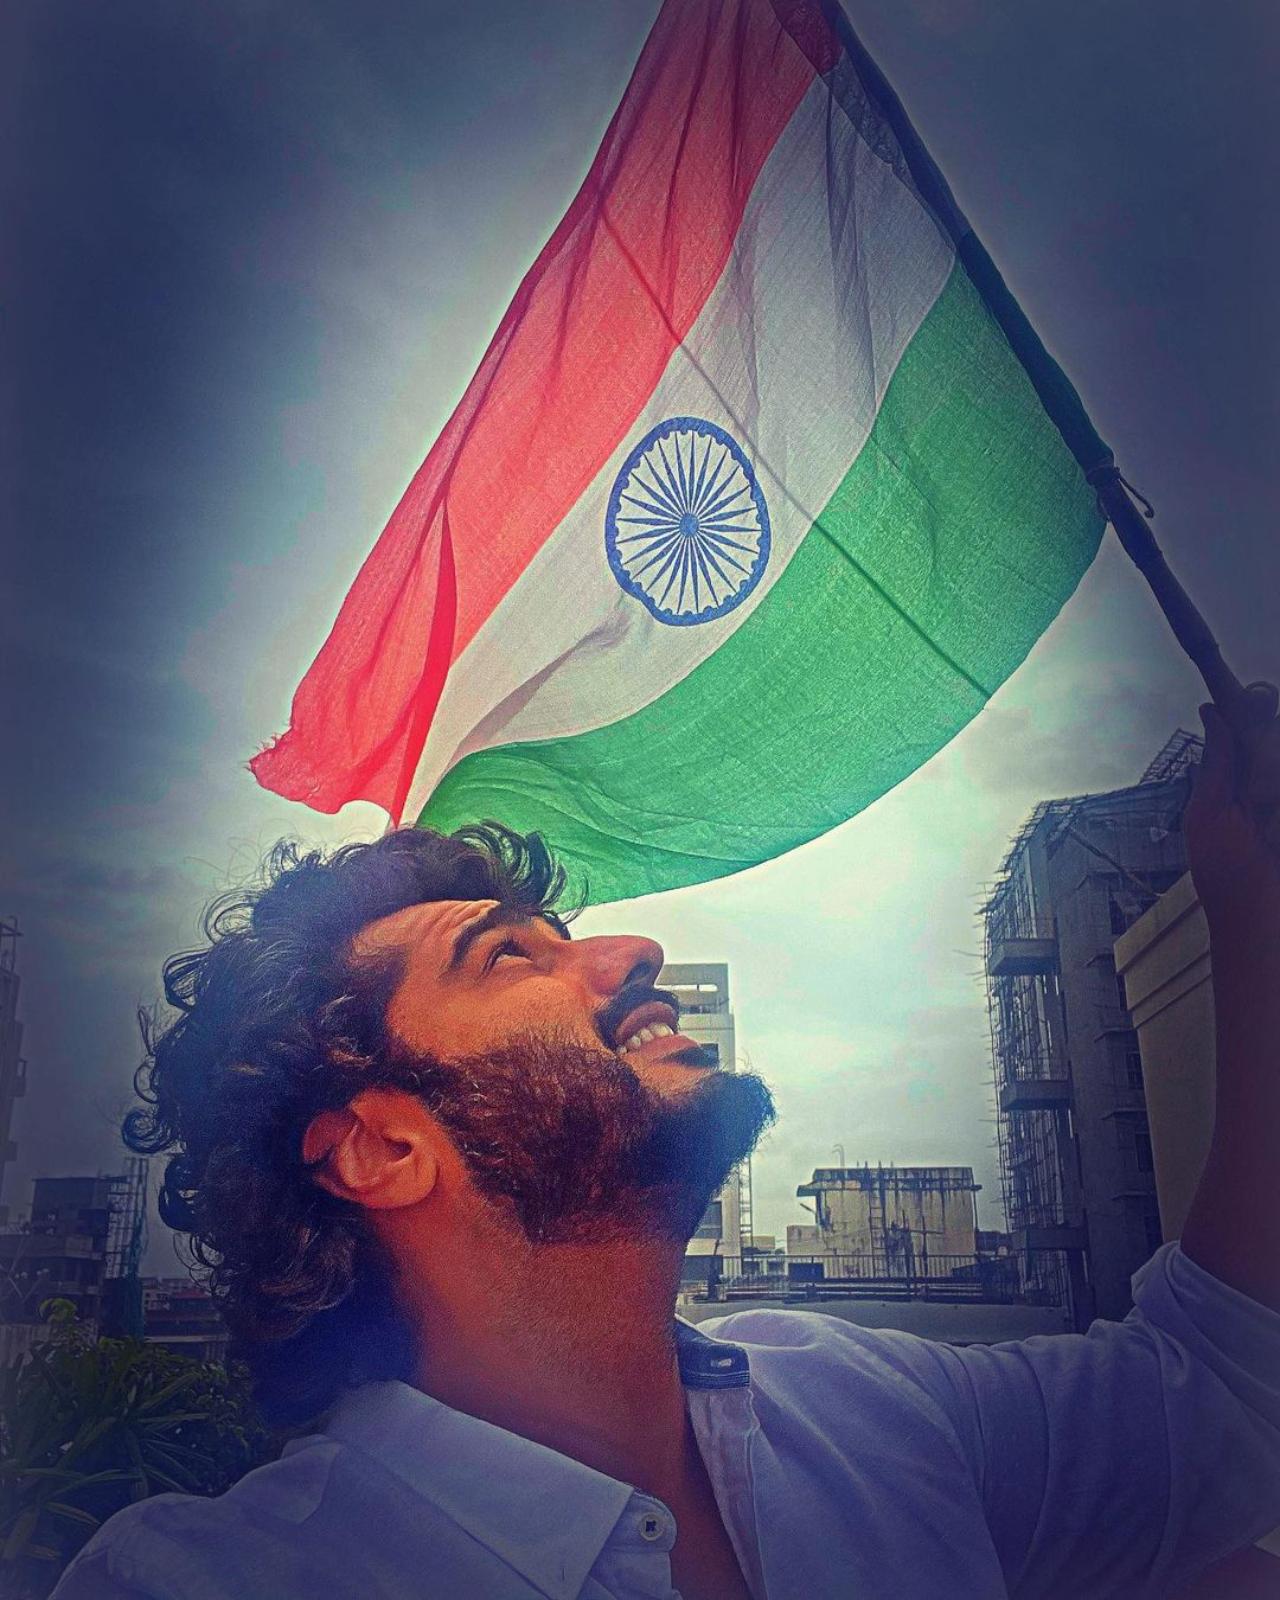 Arjun Kapoor
The 'Ek Villain Returns' actor posted a picture of him looking up in the sky holding the tricolour